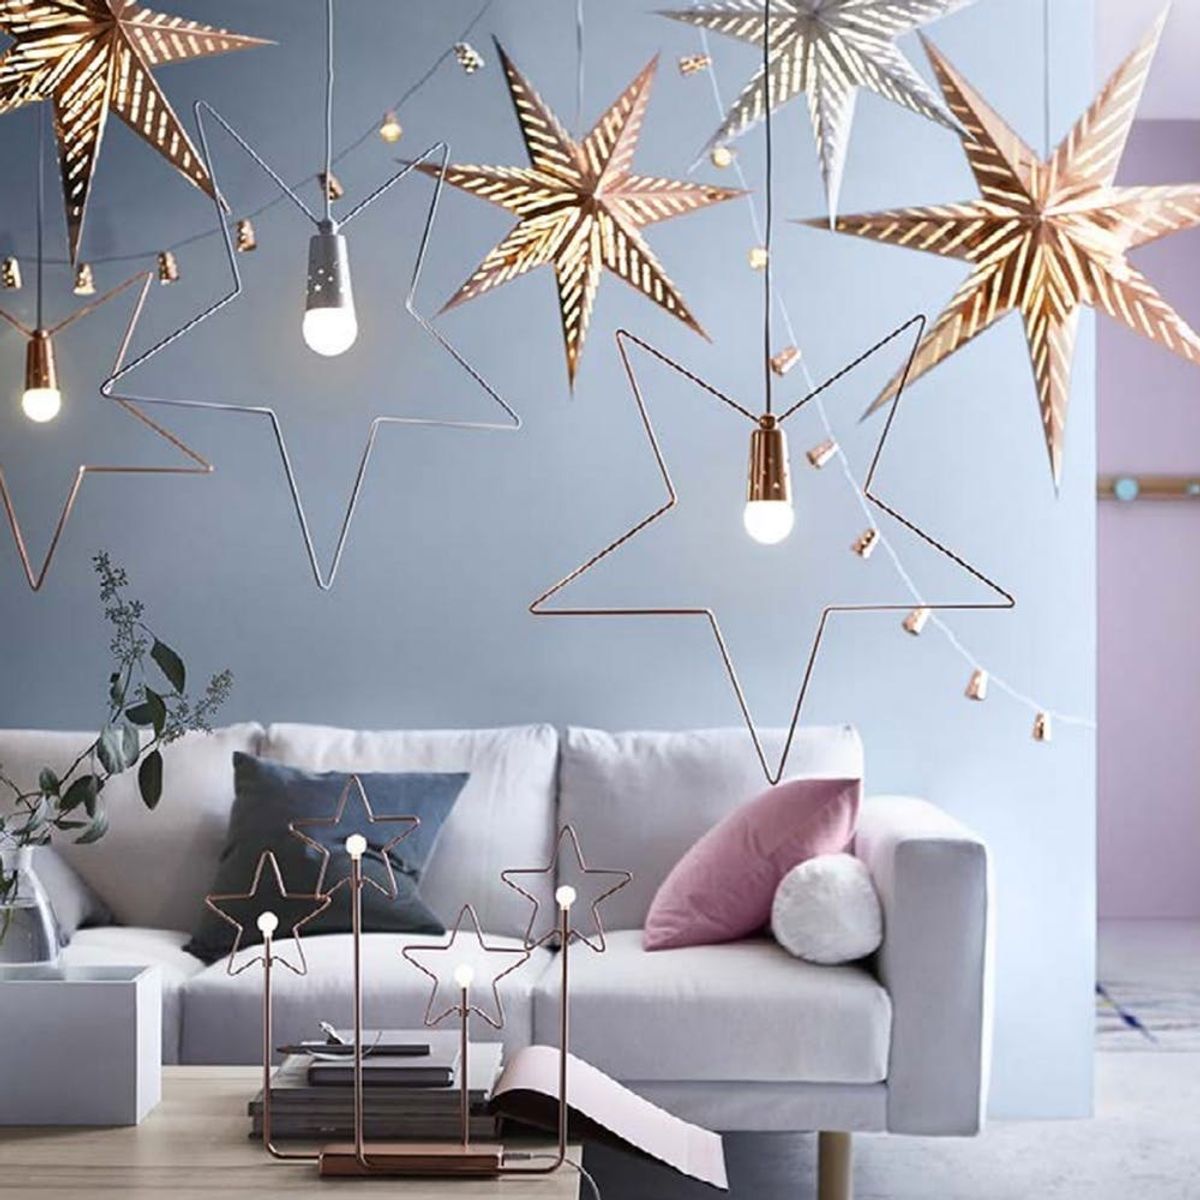 IKEA’s New Holiday Collection Will Get You Pumped for Christmas